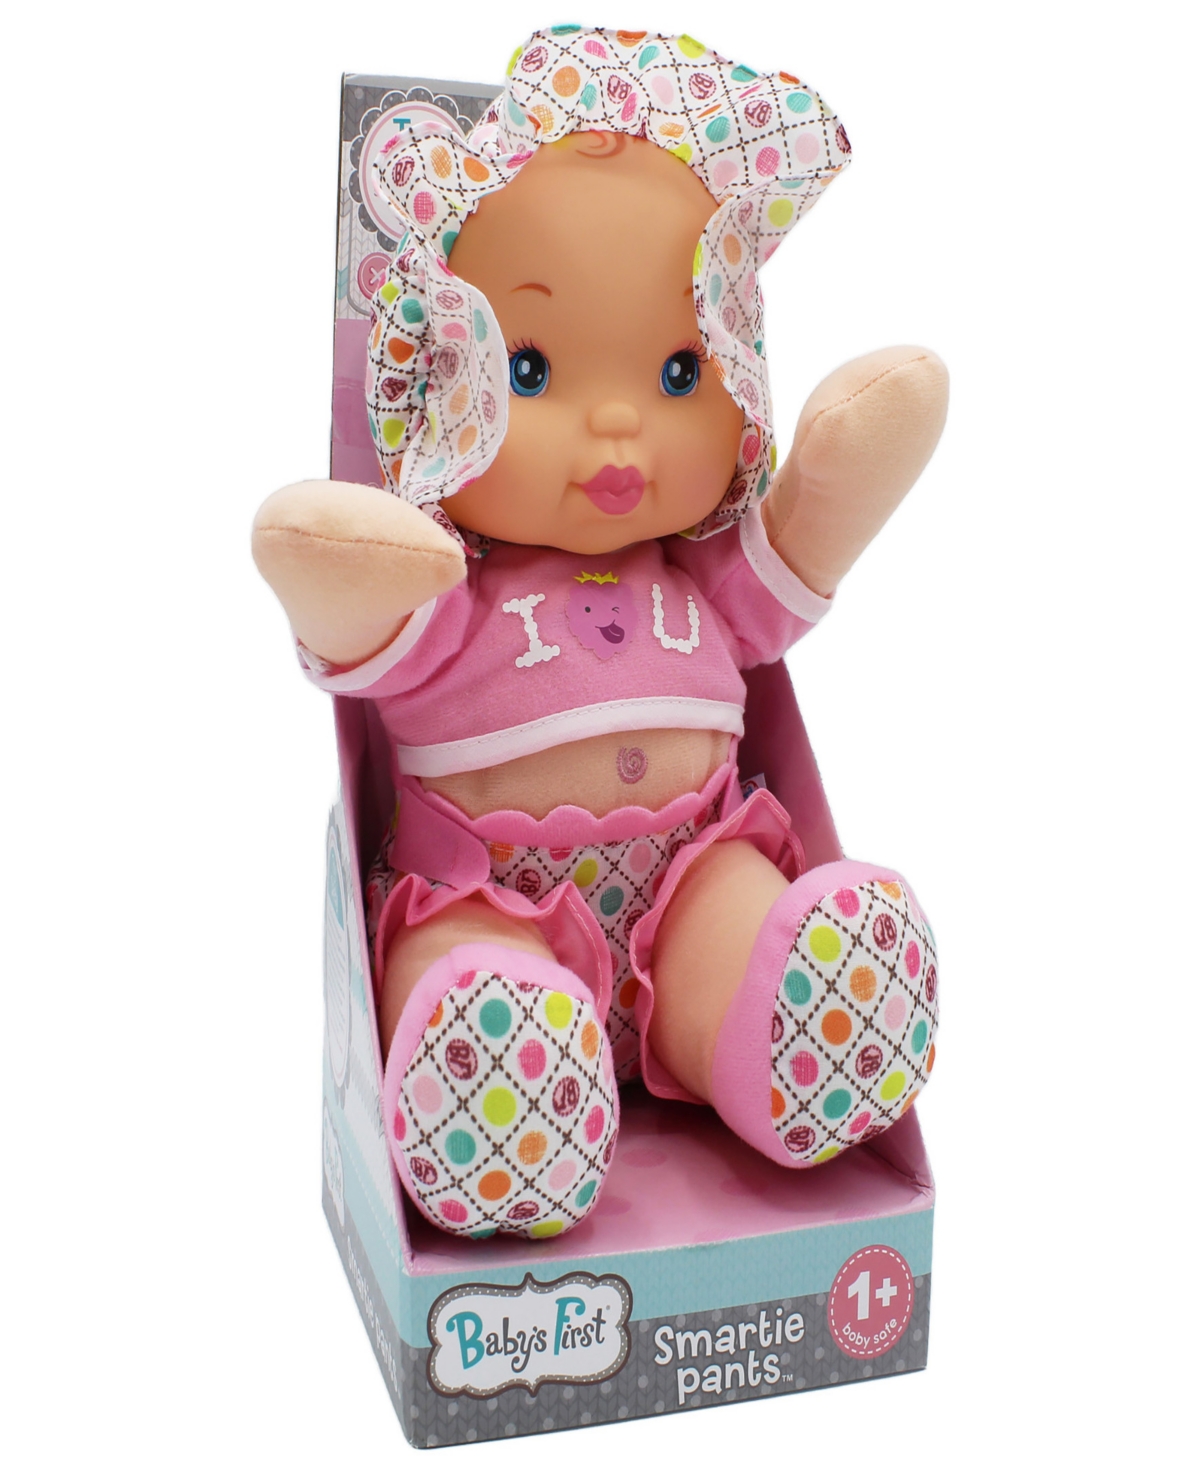 Baby's First By Nemcor Babies' Smartie Pants Toy Doll In Multi